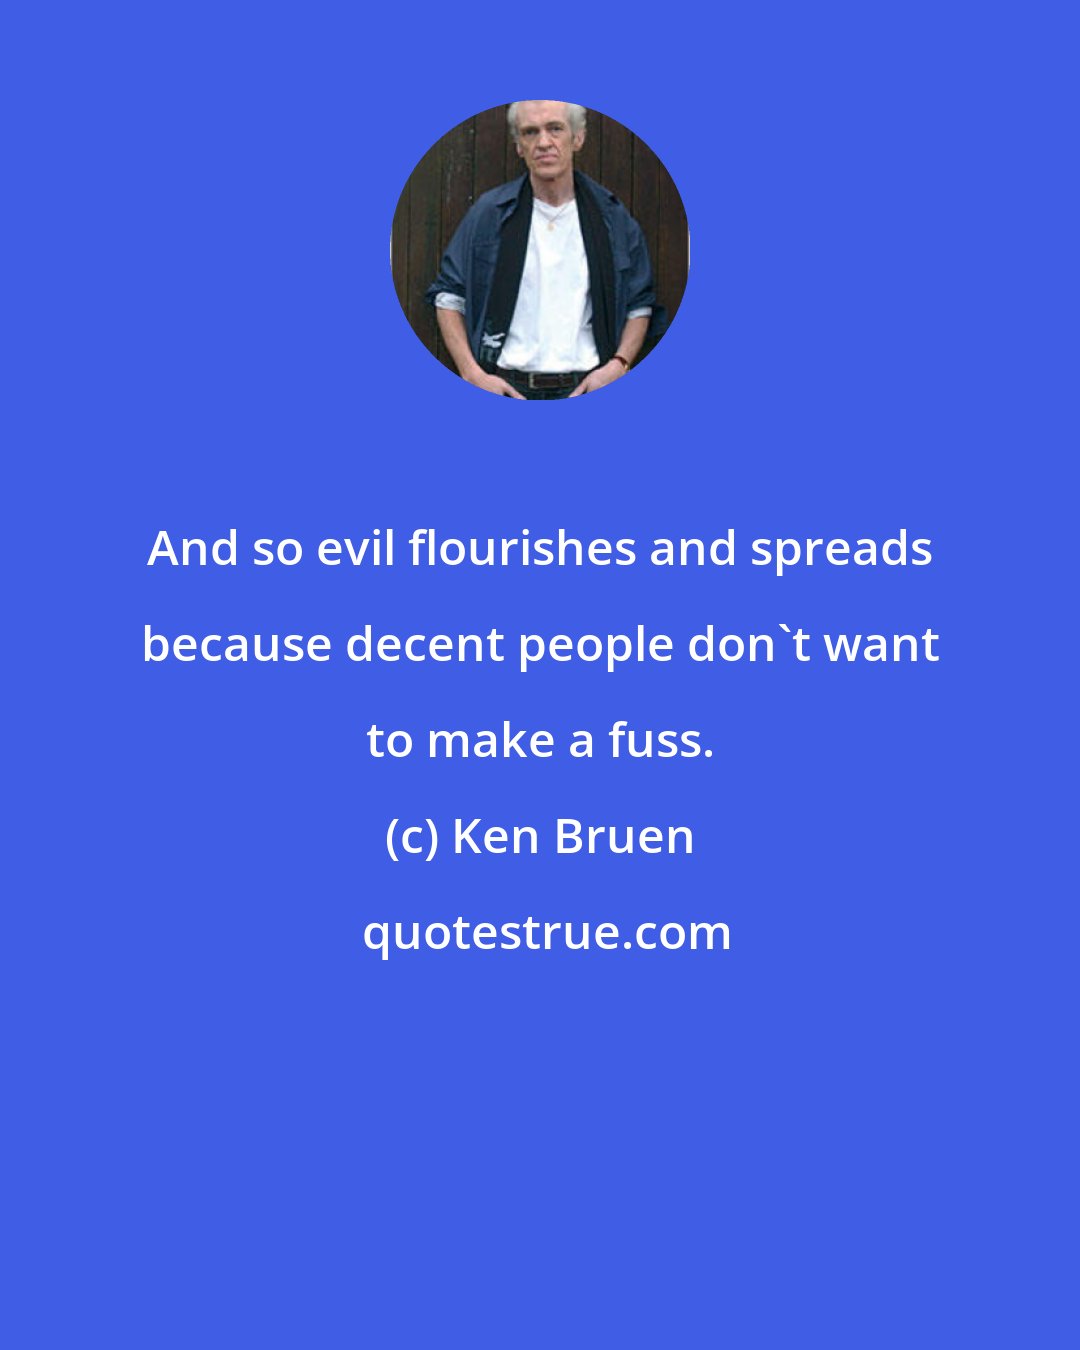 Ken Bruen: And so evil flourishes and spreads because decent people don't want to make a fuss.